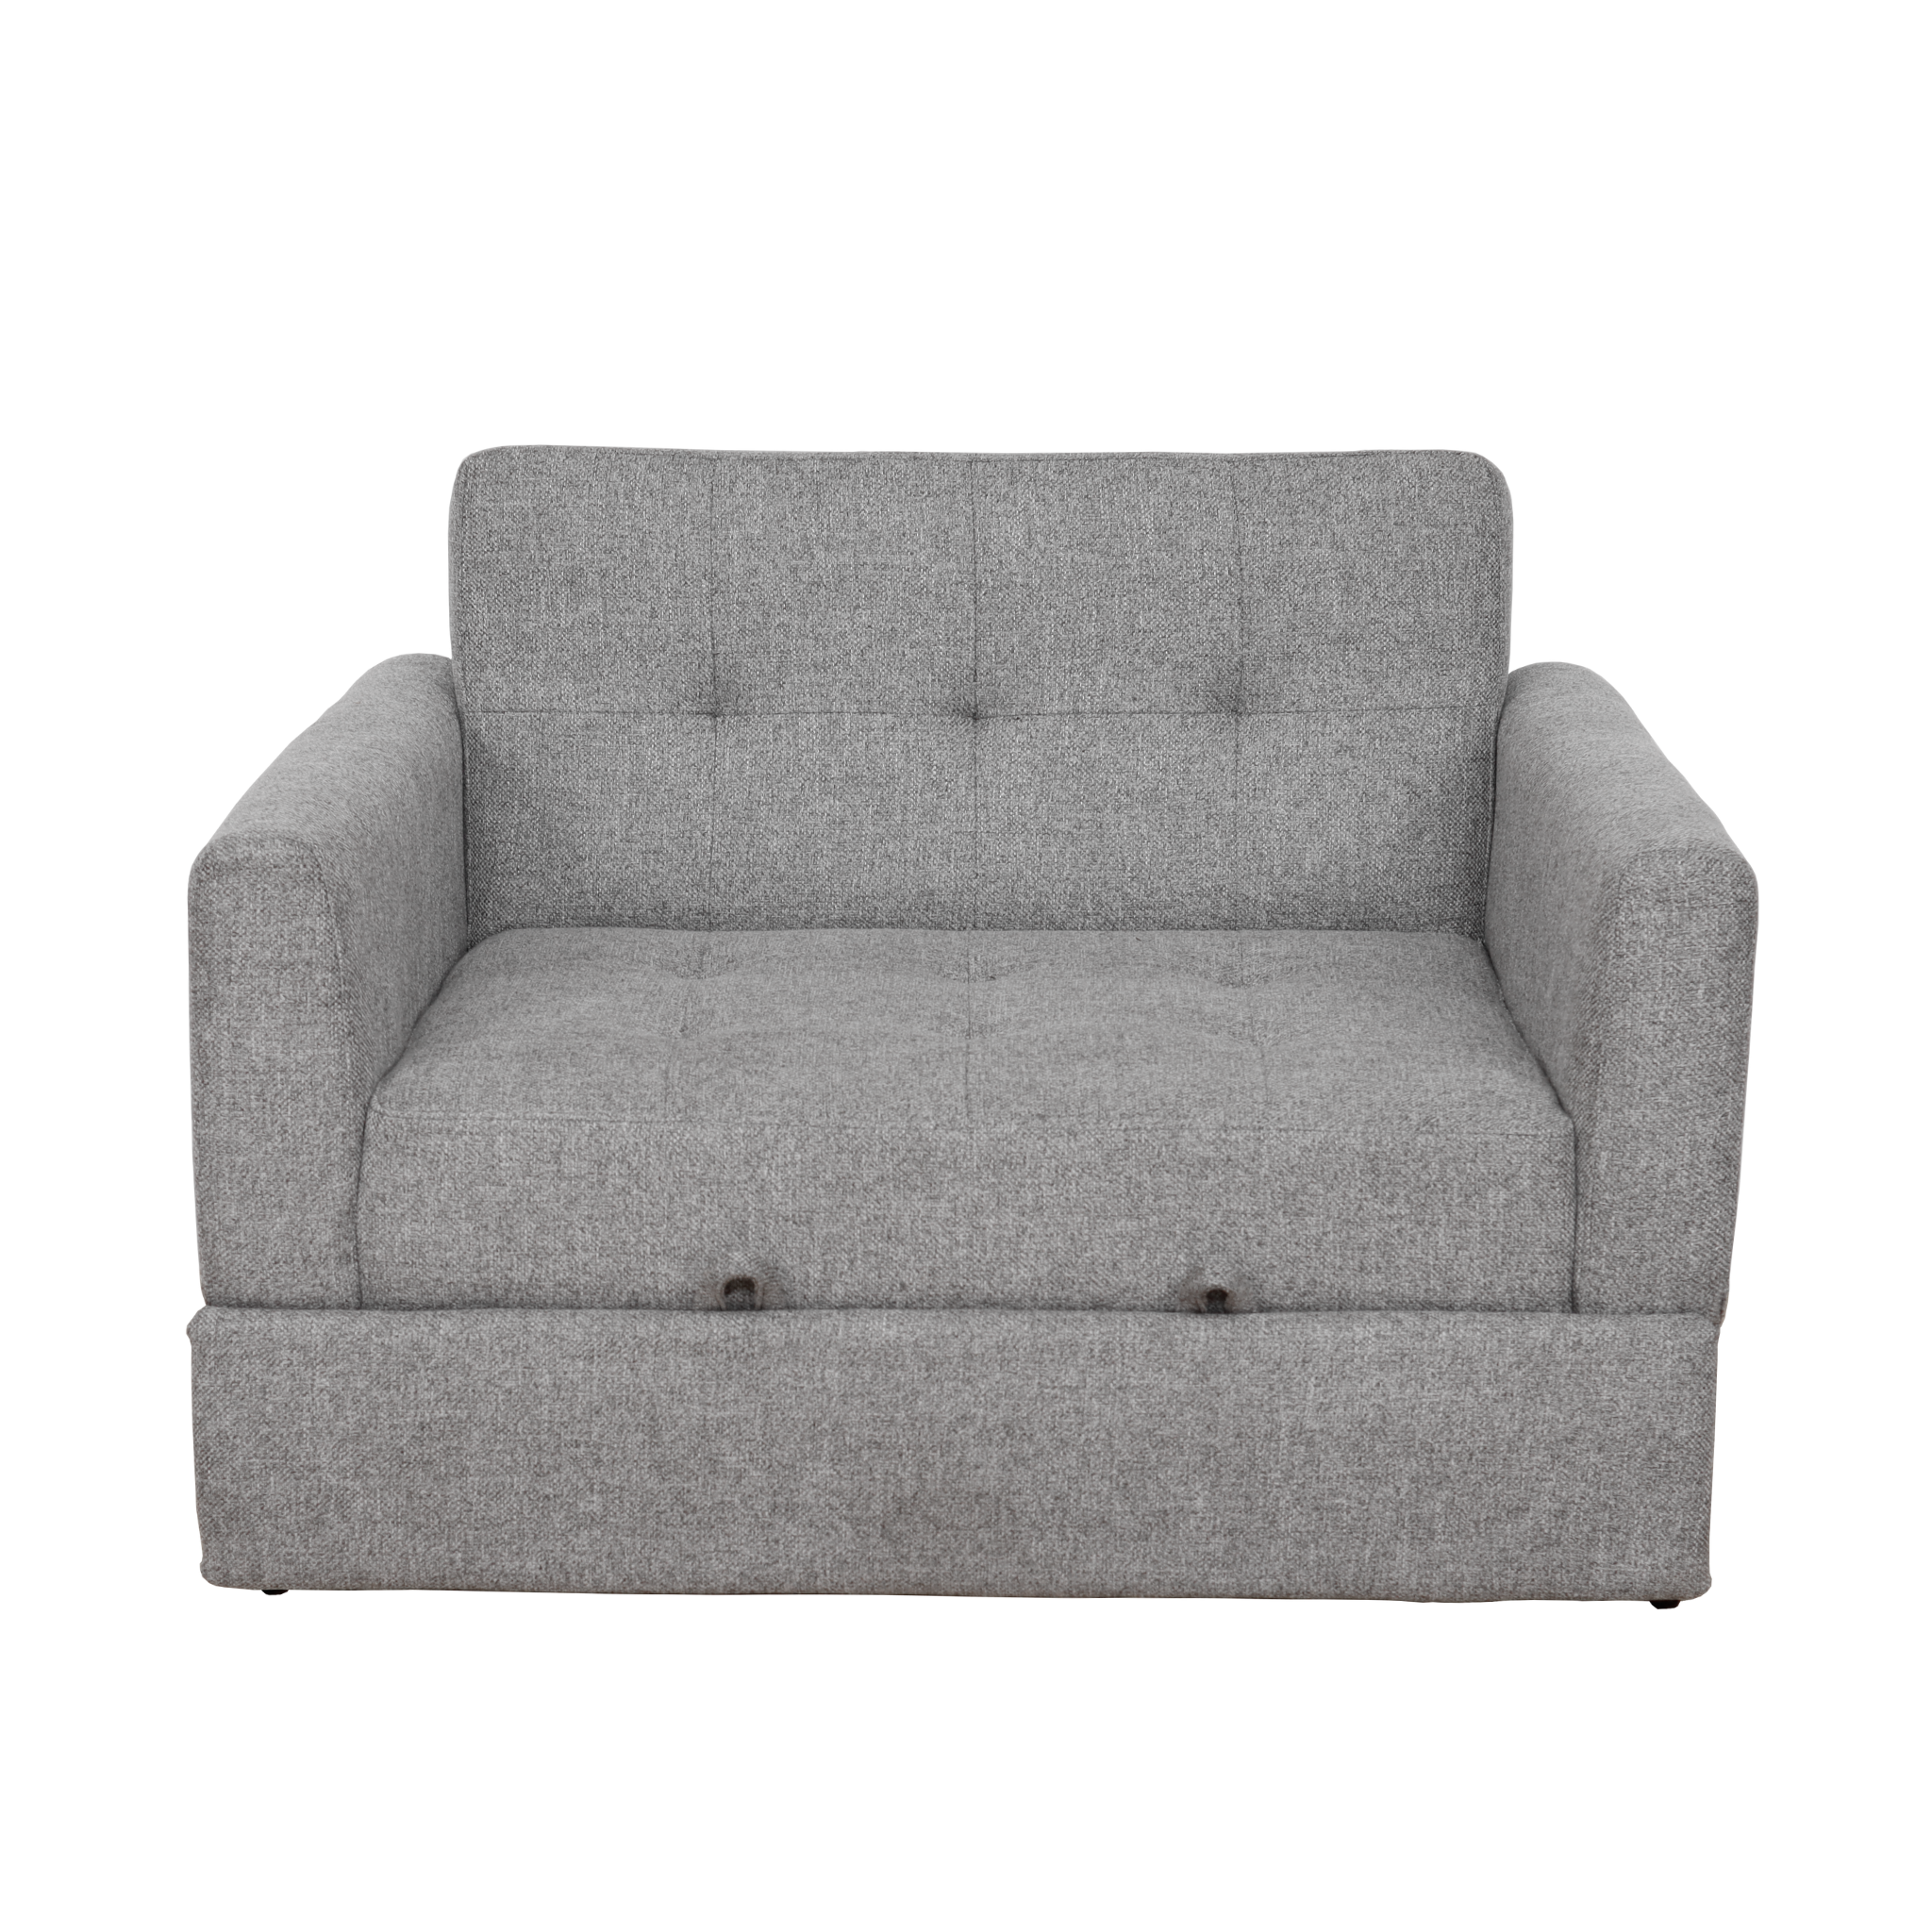 SHARON Pullout Fabric Sofabed AF Home